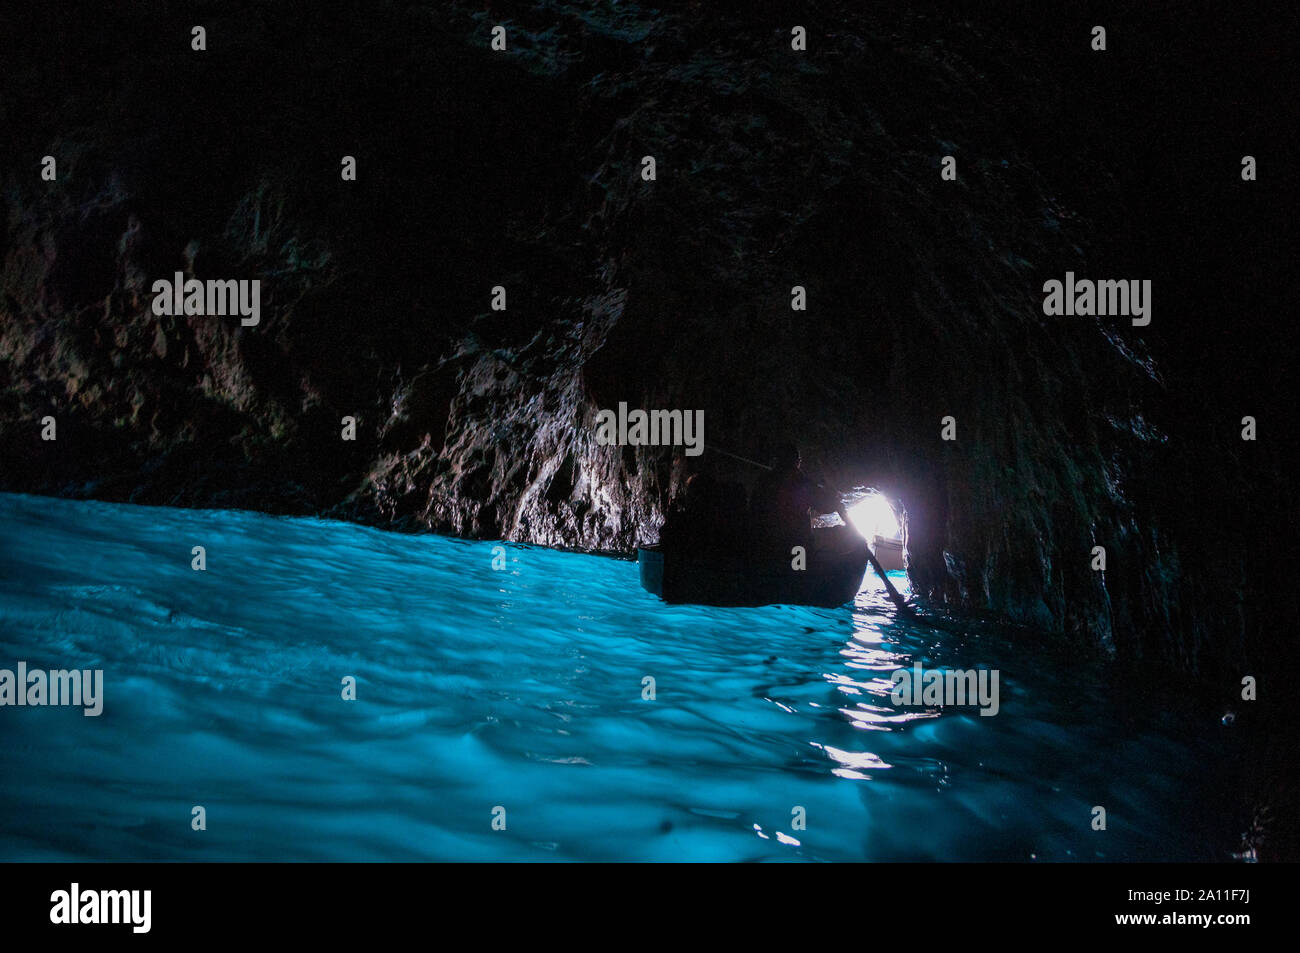 The Blue Grotto is a sea cave on the Italian island of Capri where sunlight passing through an underwater cavity creates a blue reflection inside. Stock Photo